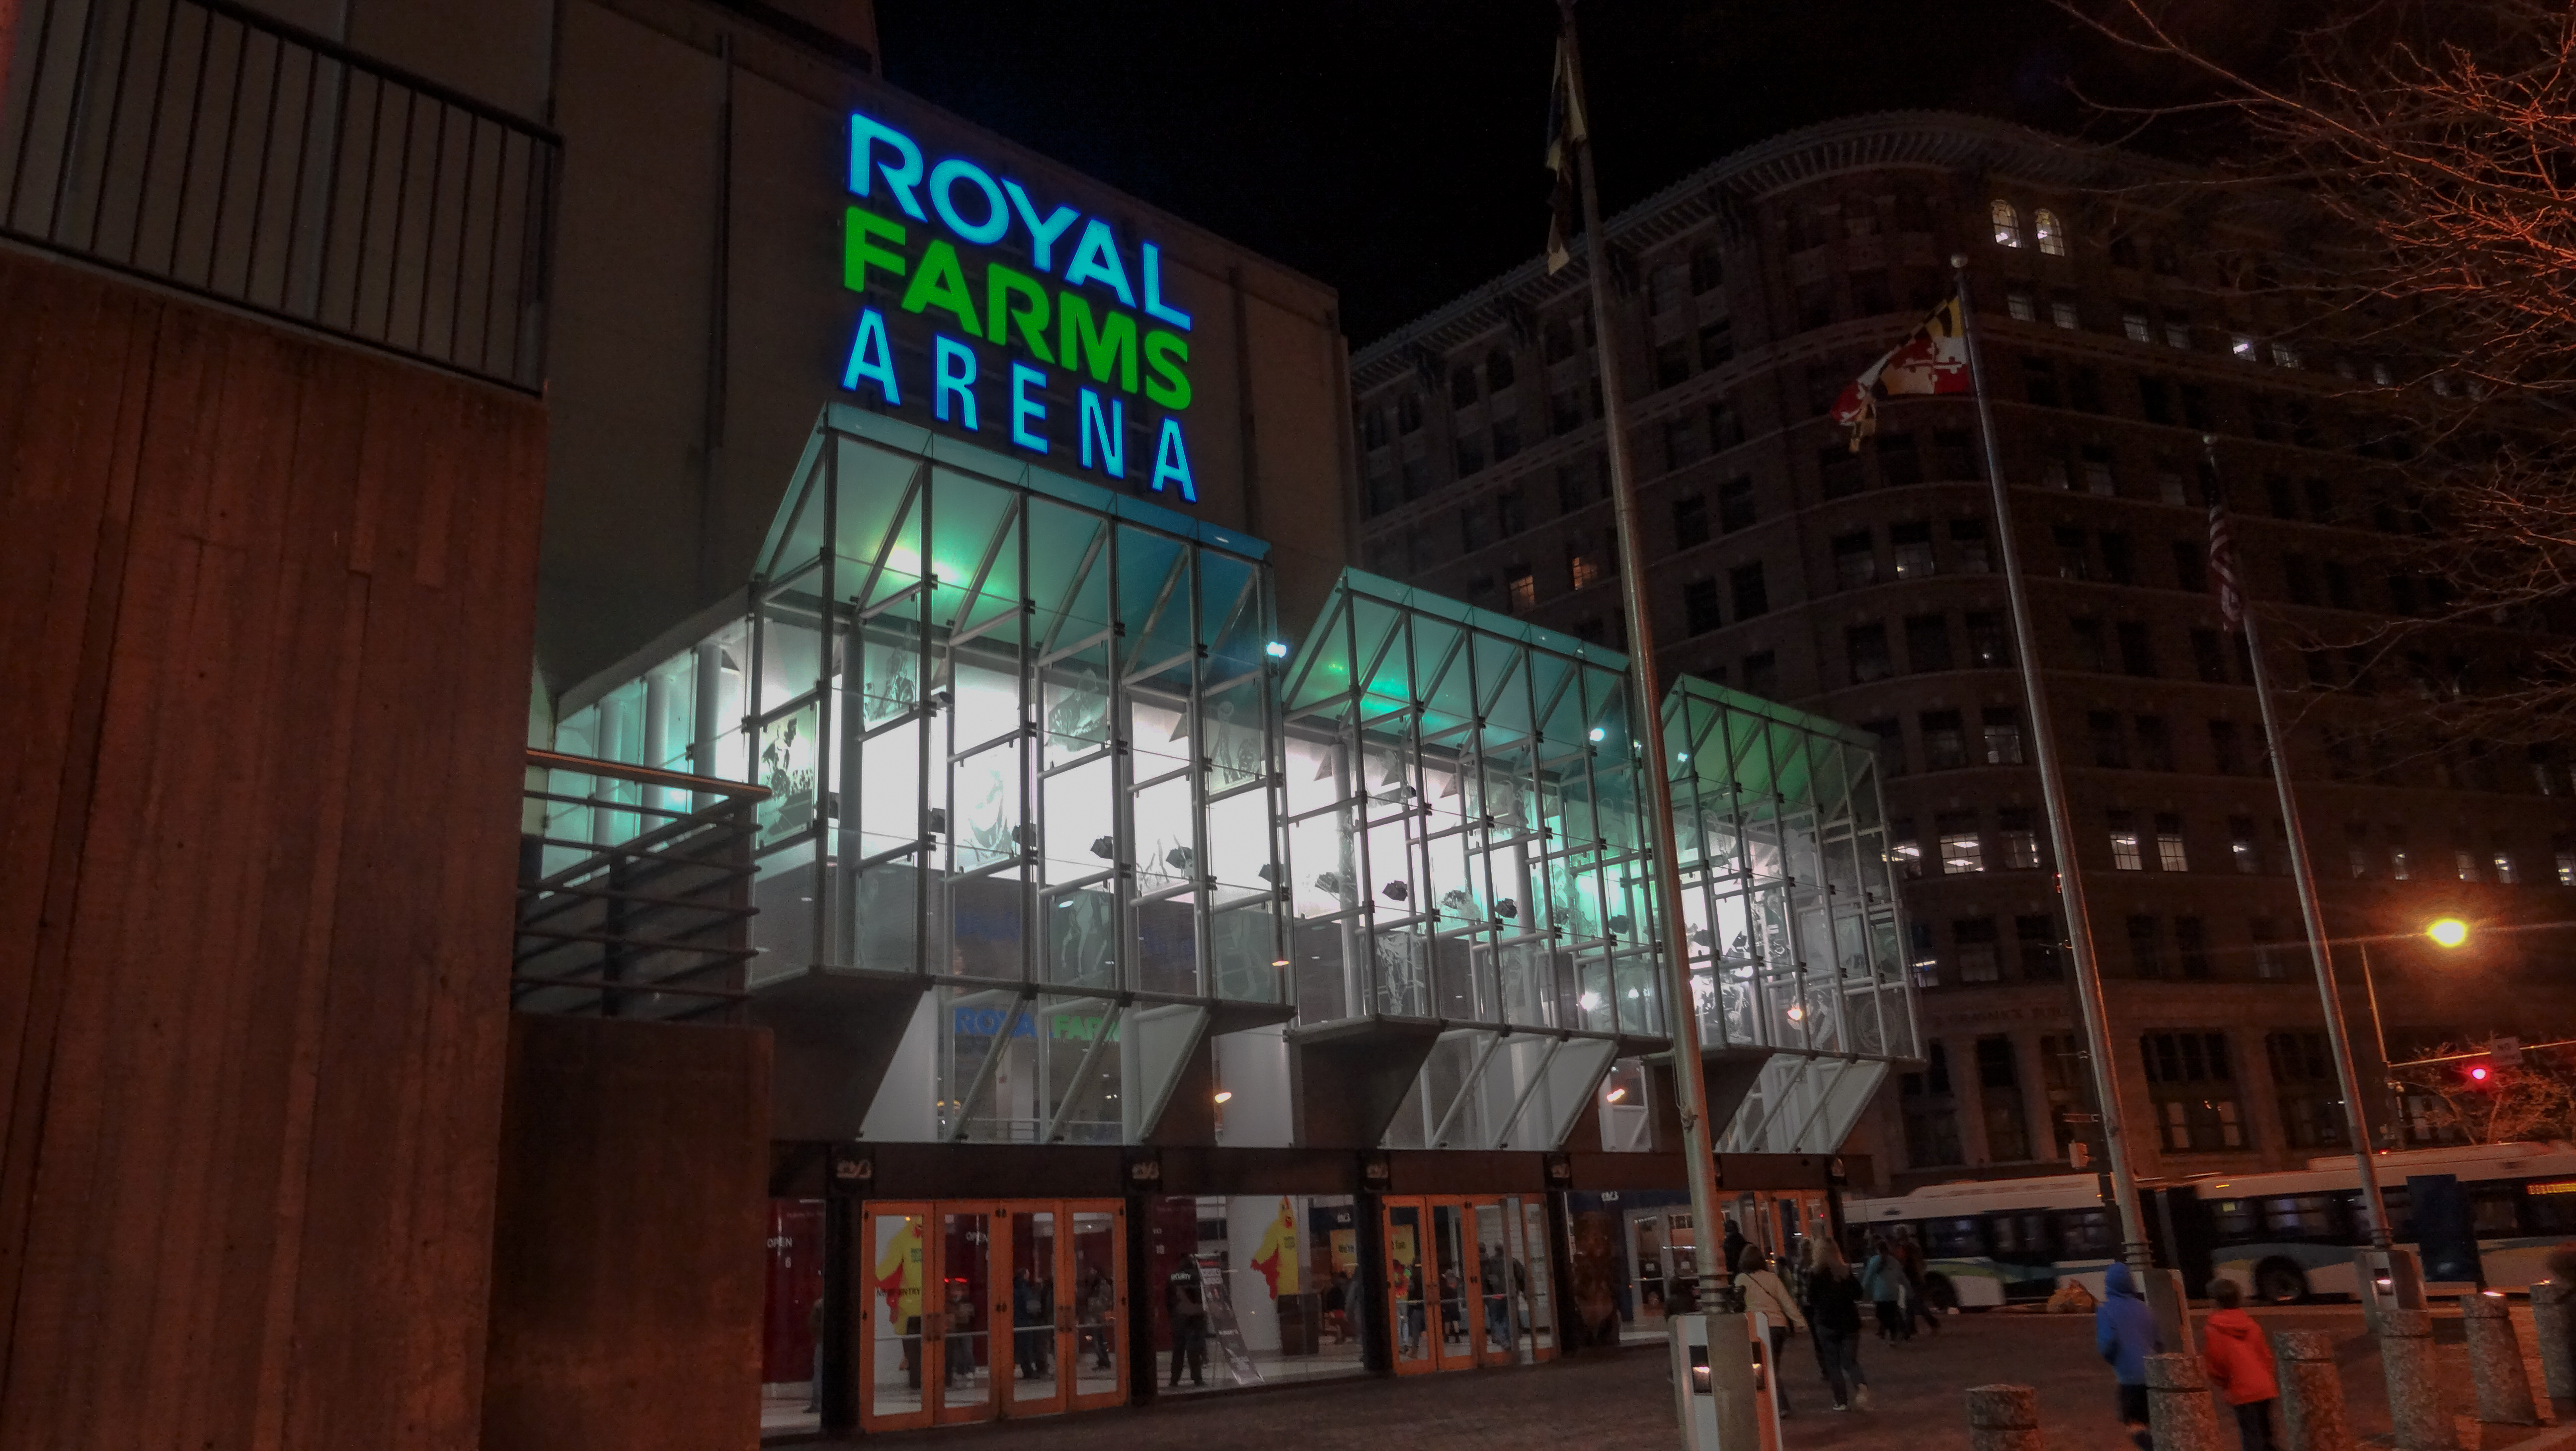 places to eat near royal farms arena